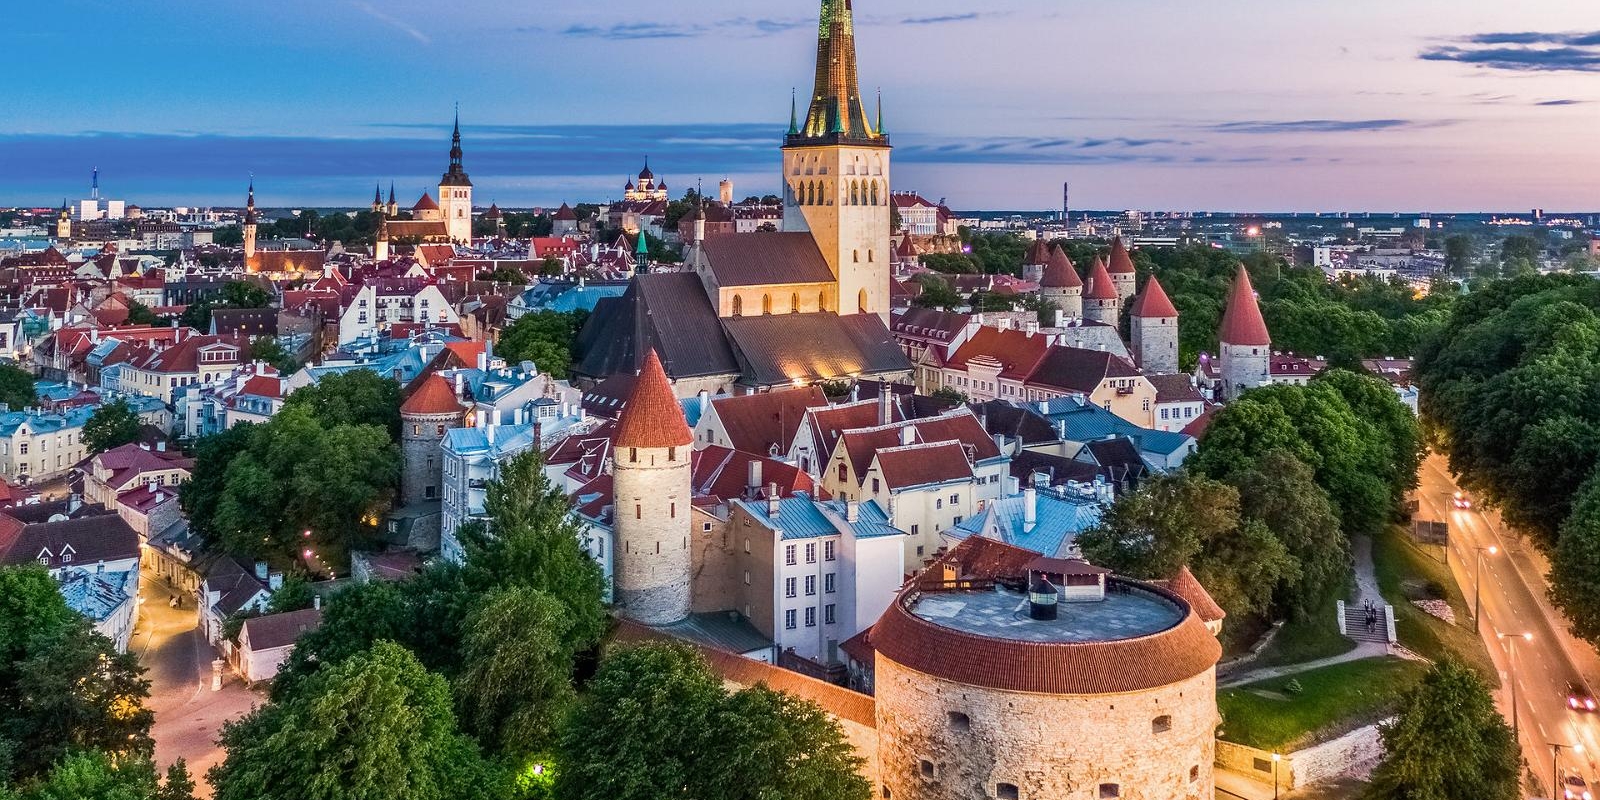 Buying, renting real estate and residence permit in Estonia: answering the most popular questions